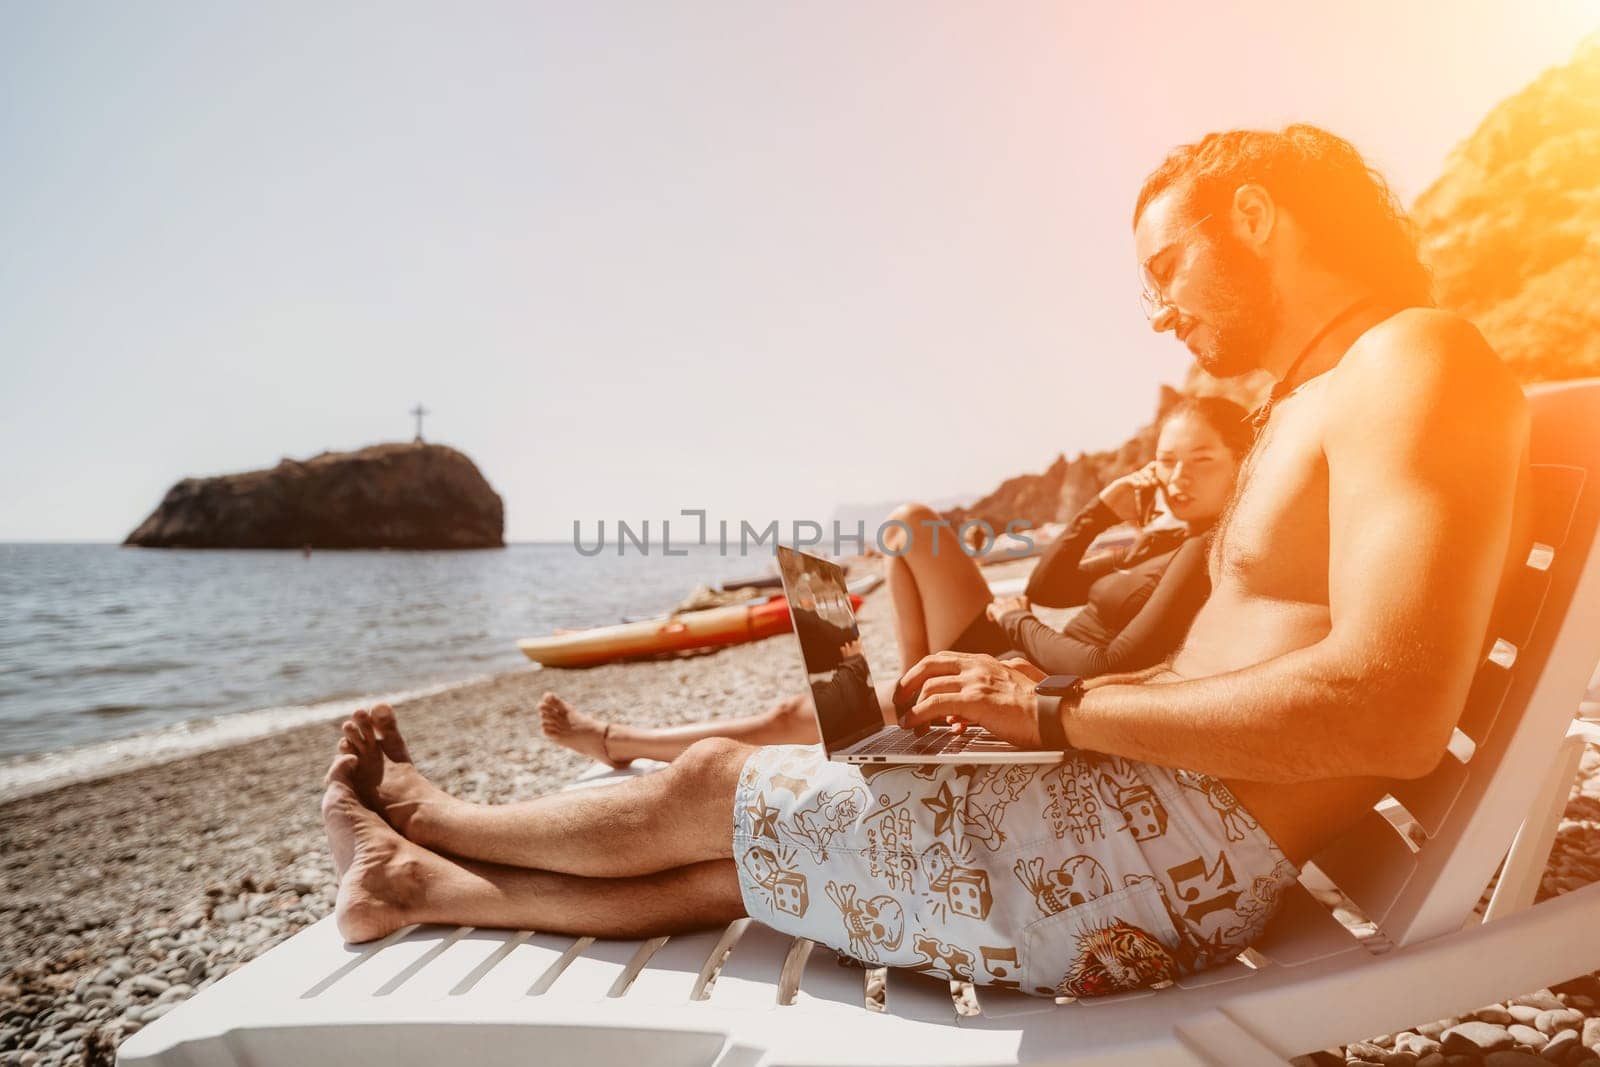 Digital nomad, Business man working on laptop by the sea. Man typing on computer by the sea at sunset, makes a business transaction online from a distance. Freelance, remote work on vacation